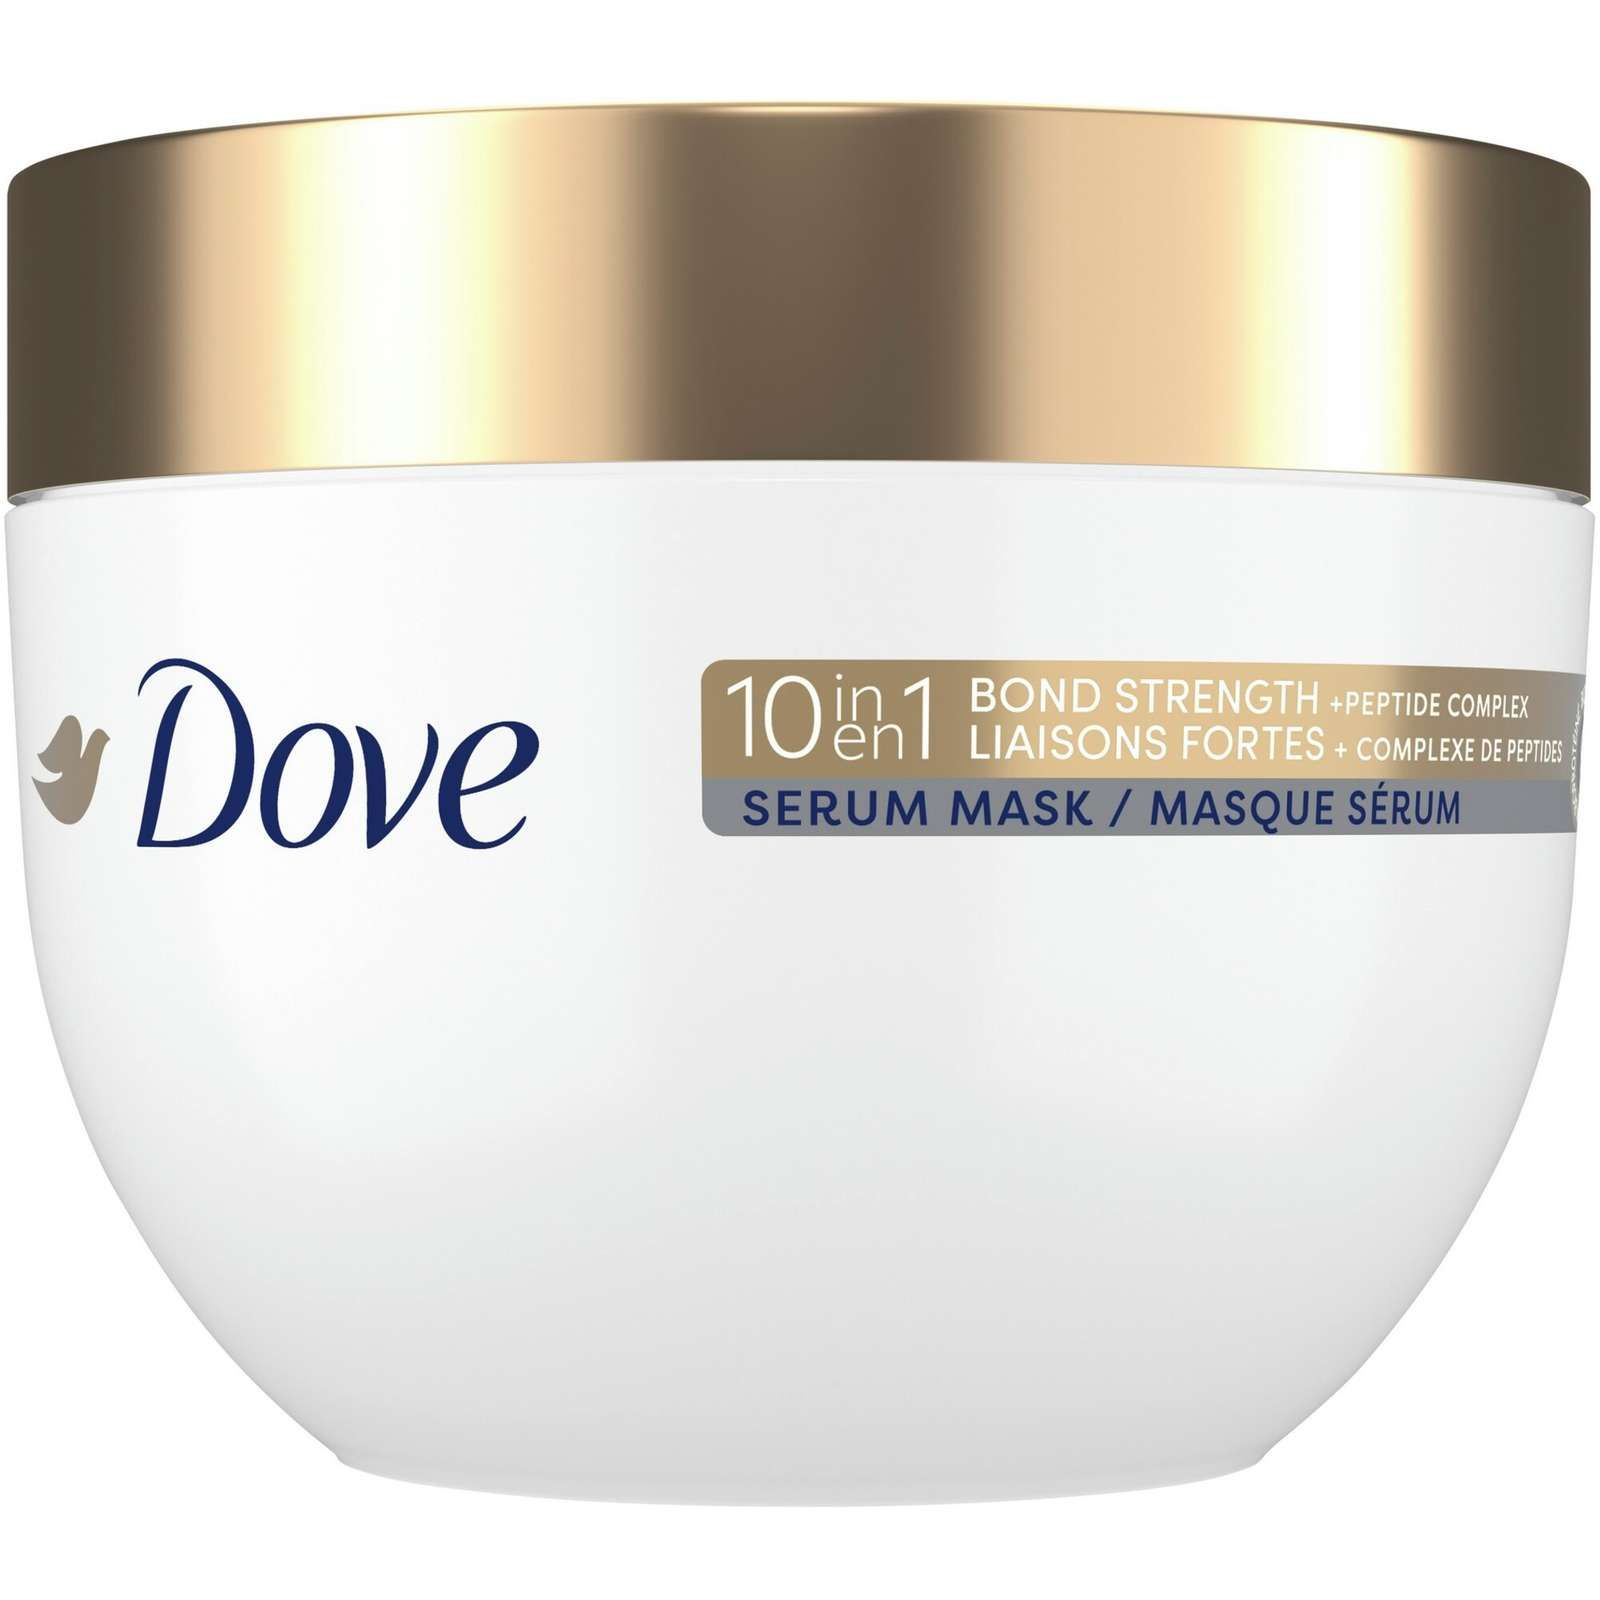 10-in-1 Bond Strength Hair Mask for damaged hair with Bio Protein Care + peptides helps repair vi... | Shoppers Drug Mart - Beauty